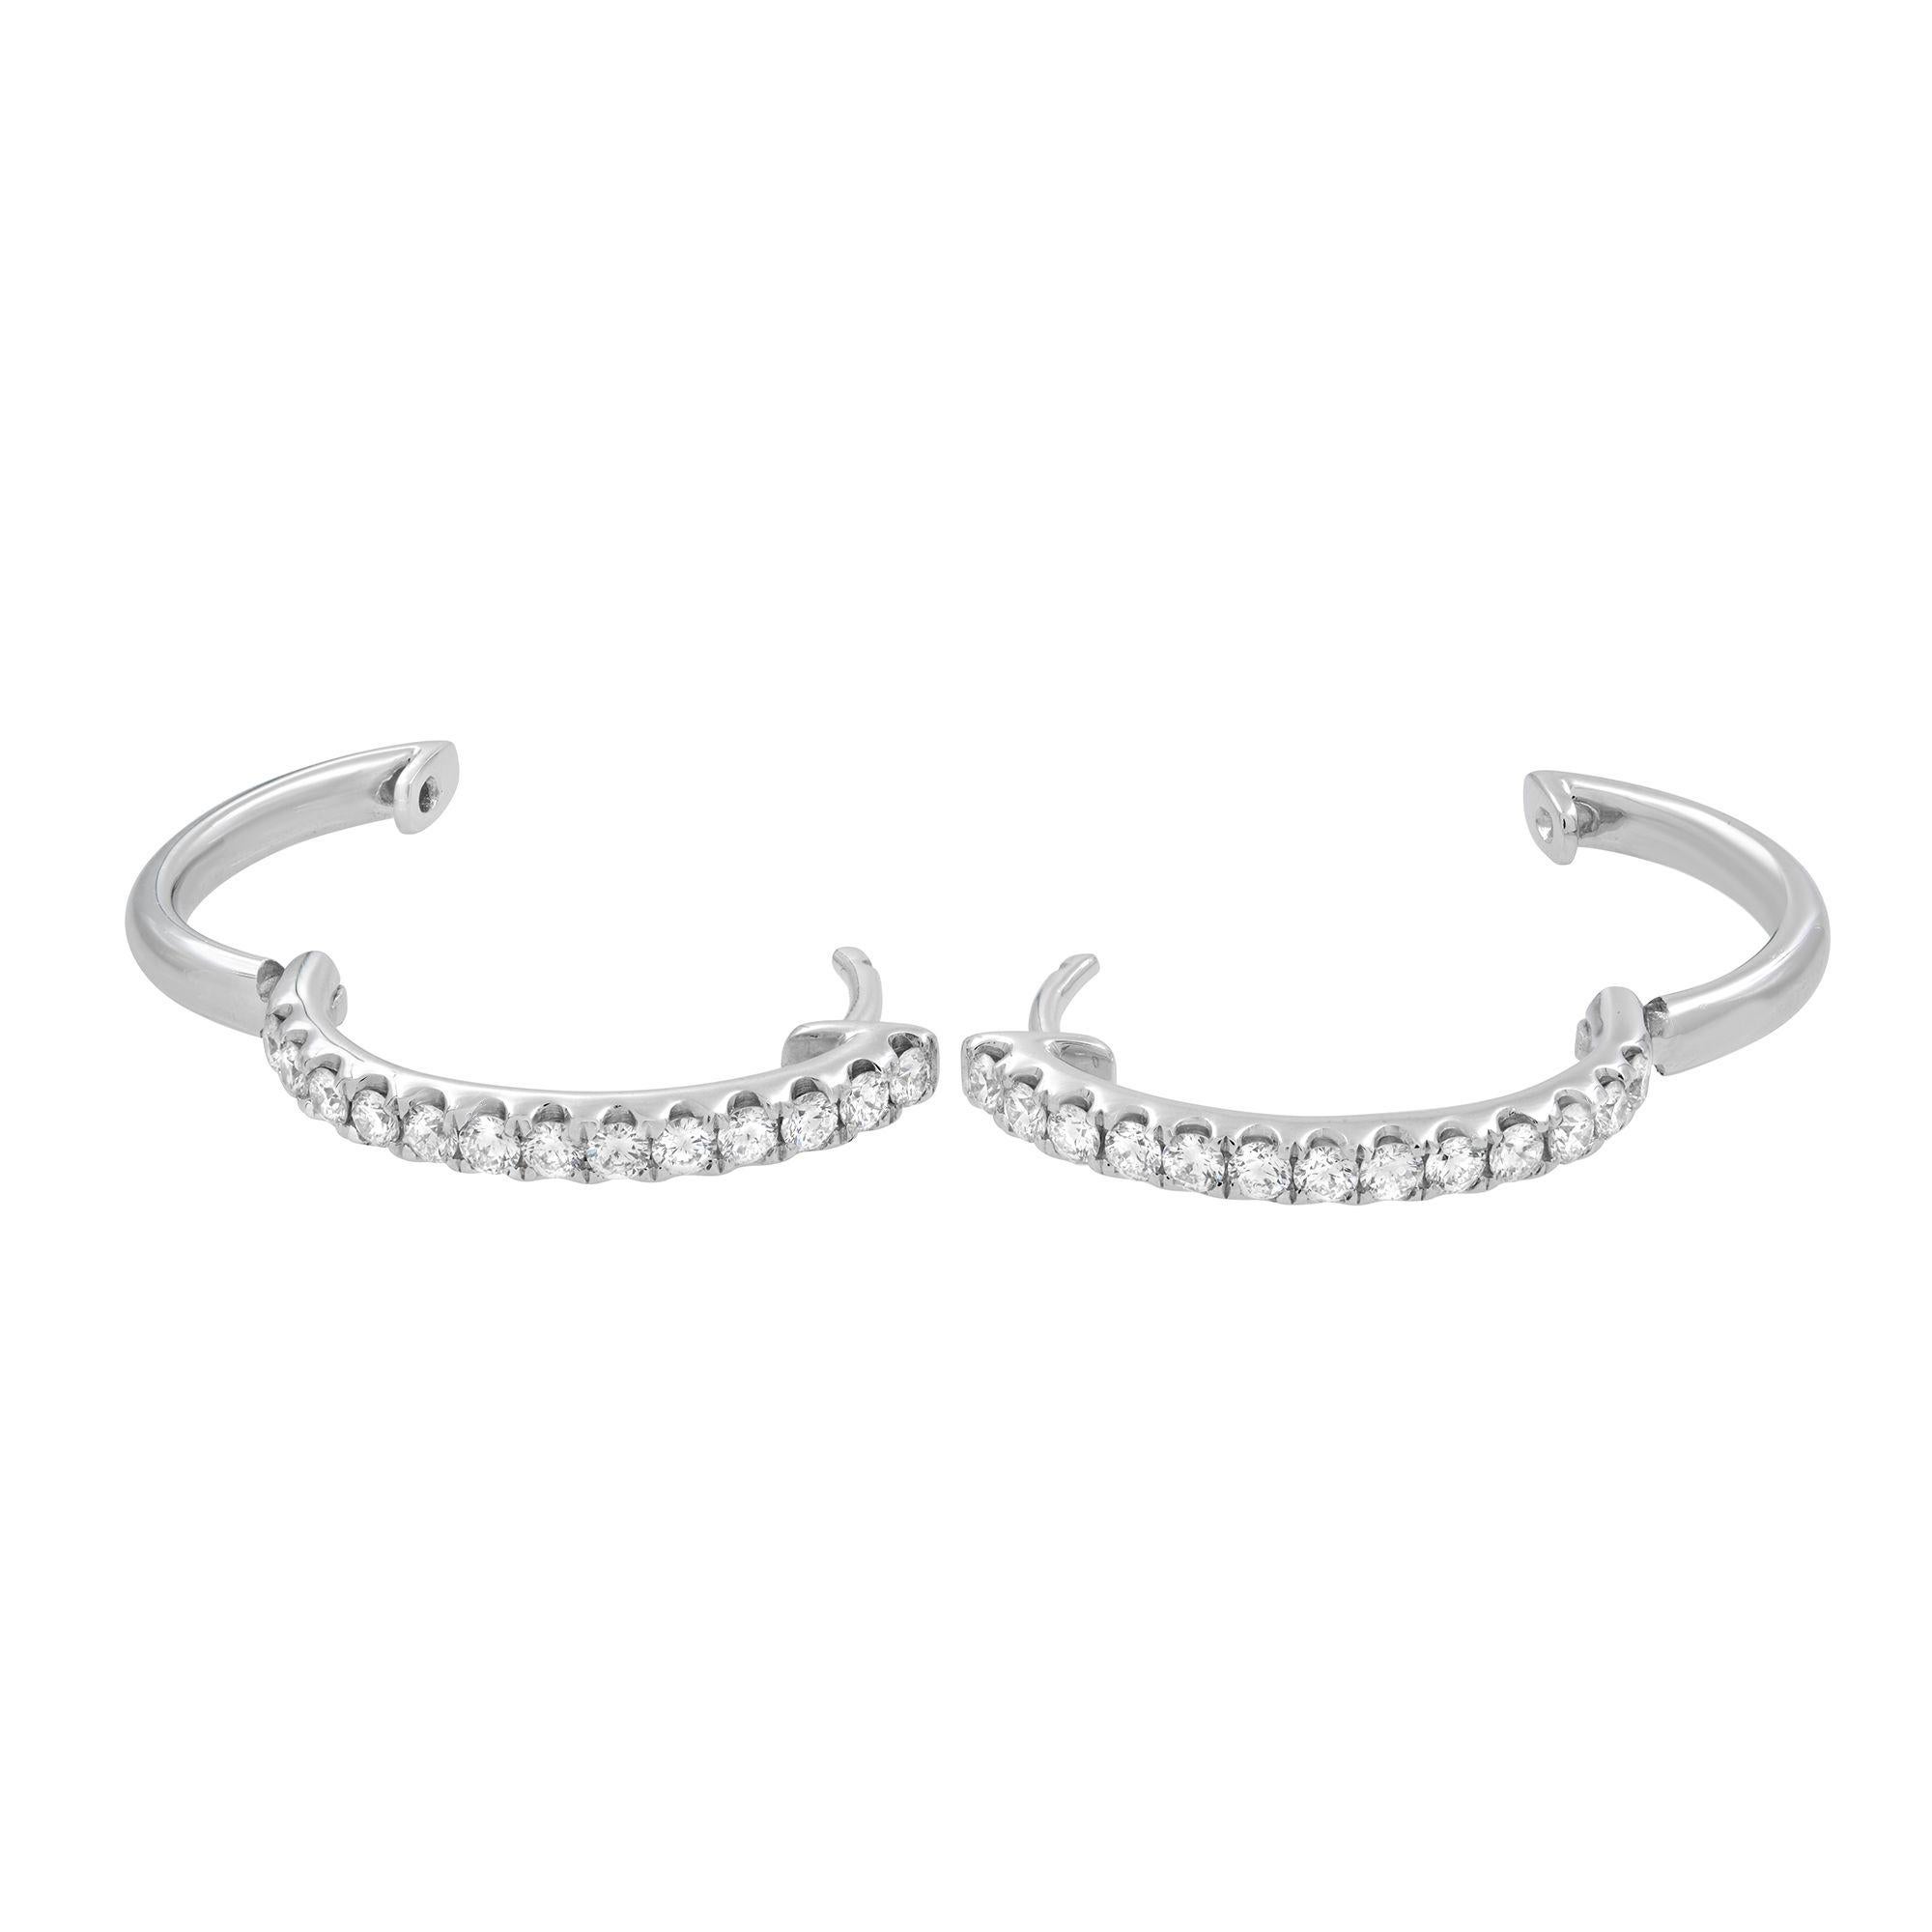 This diamond hoop earring are made with 18K White Gold and feature round cut G VS1 0.29 carat diamonds on each earring. Total carat weight: 0.58. The earrings come with a presentation box.